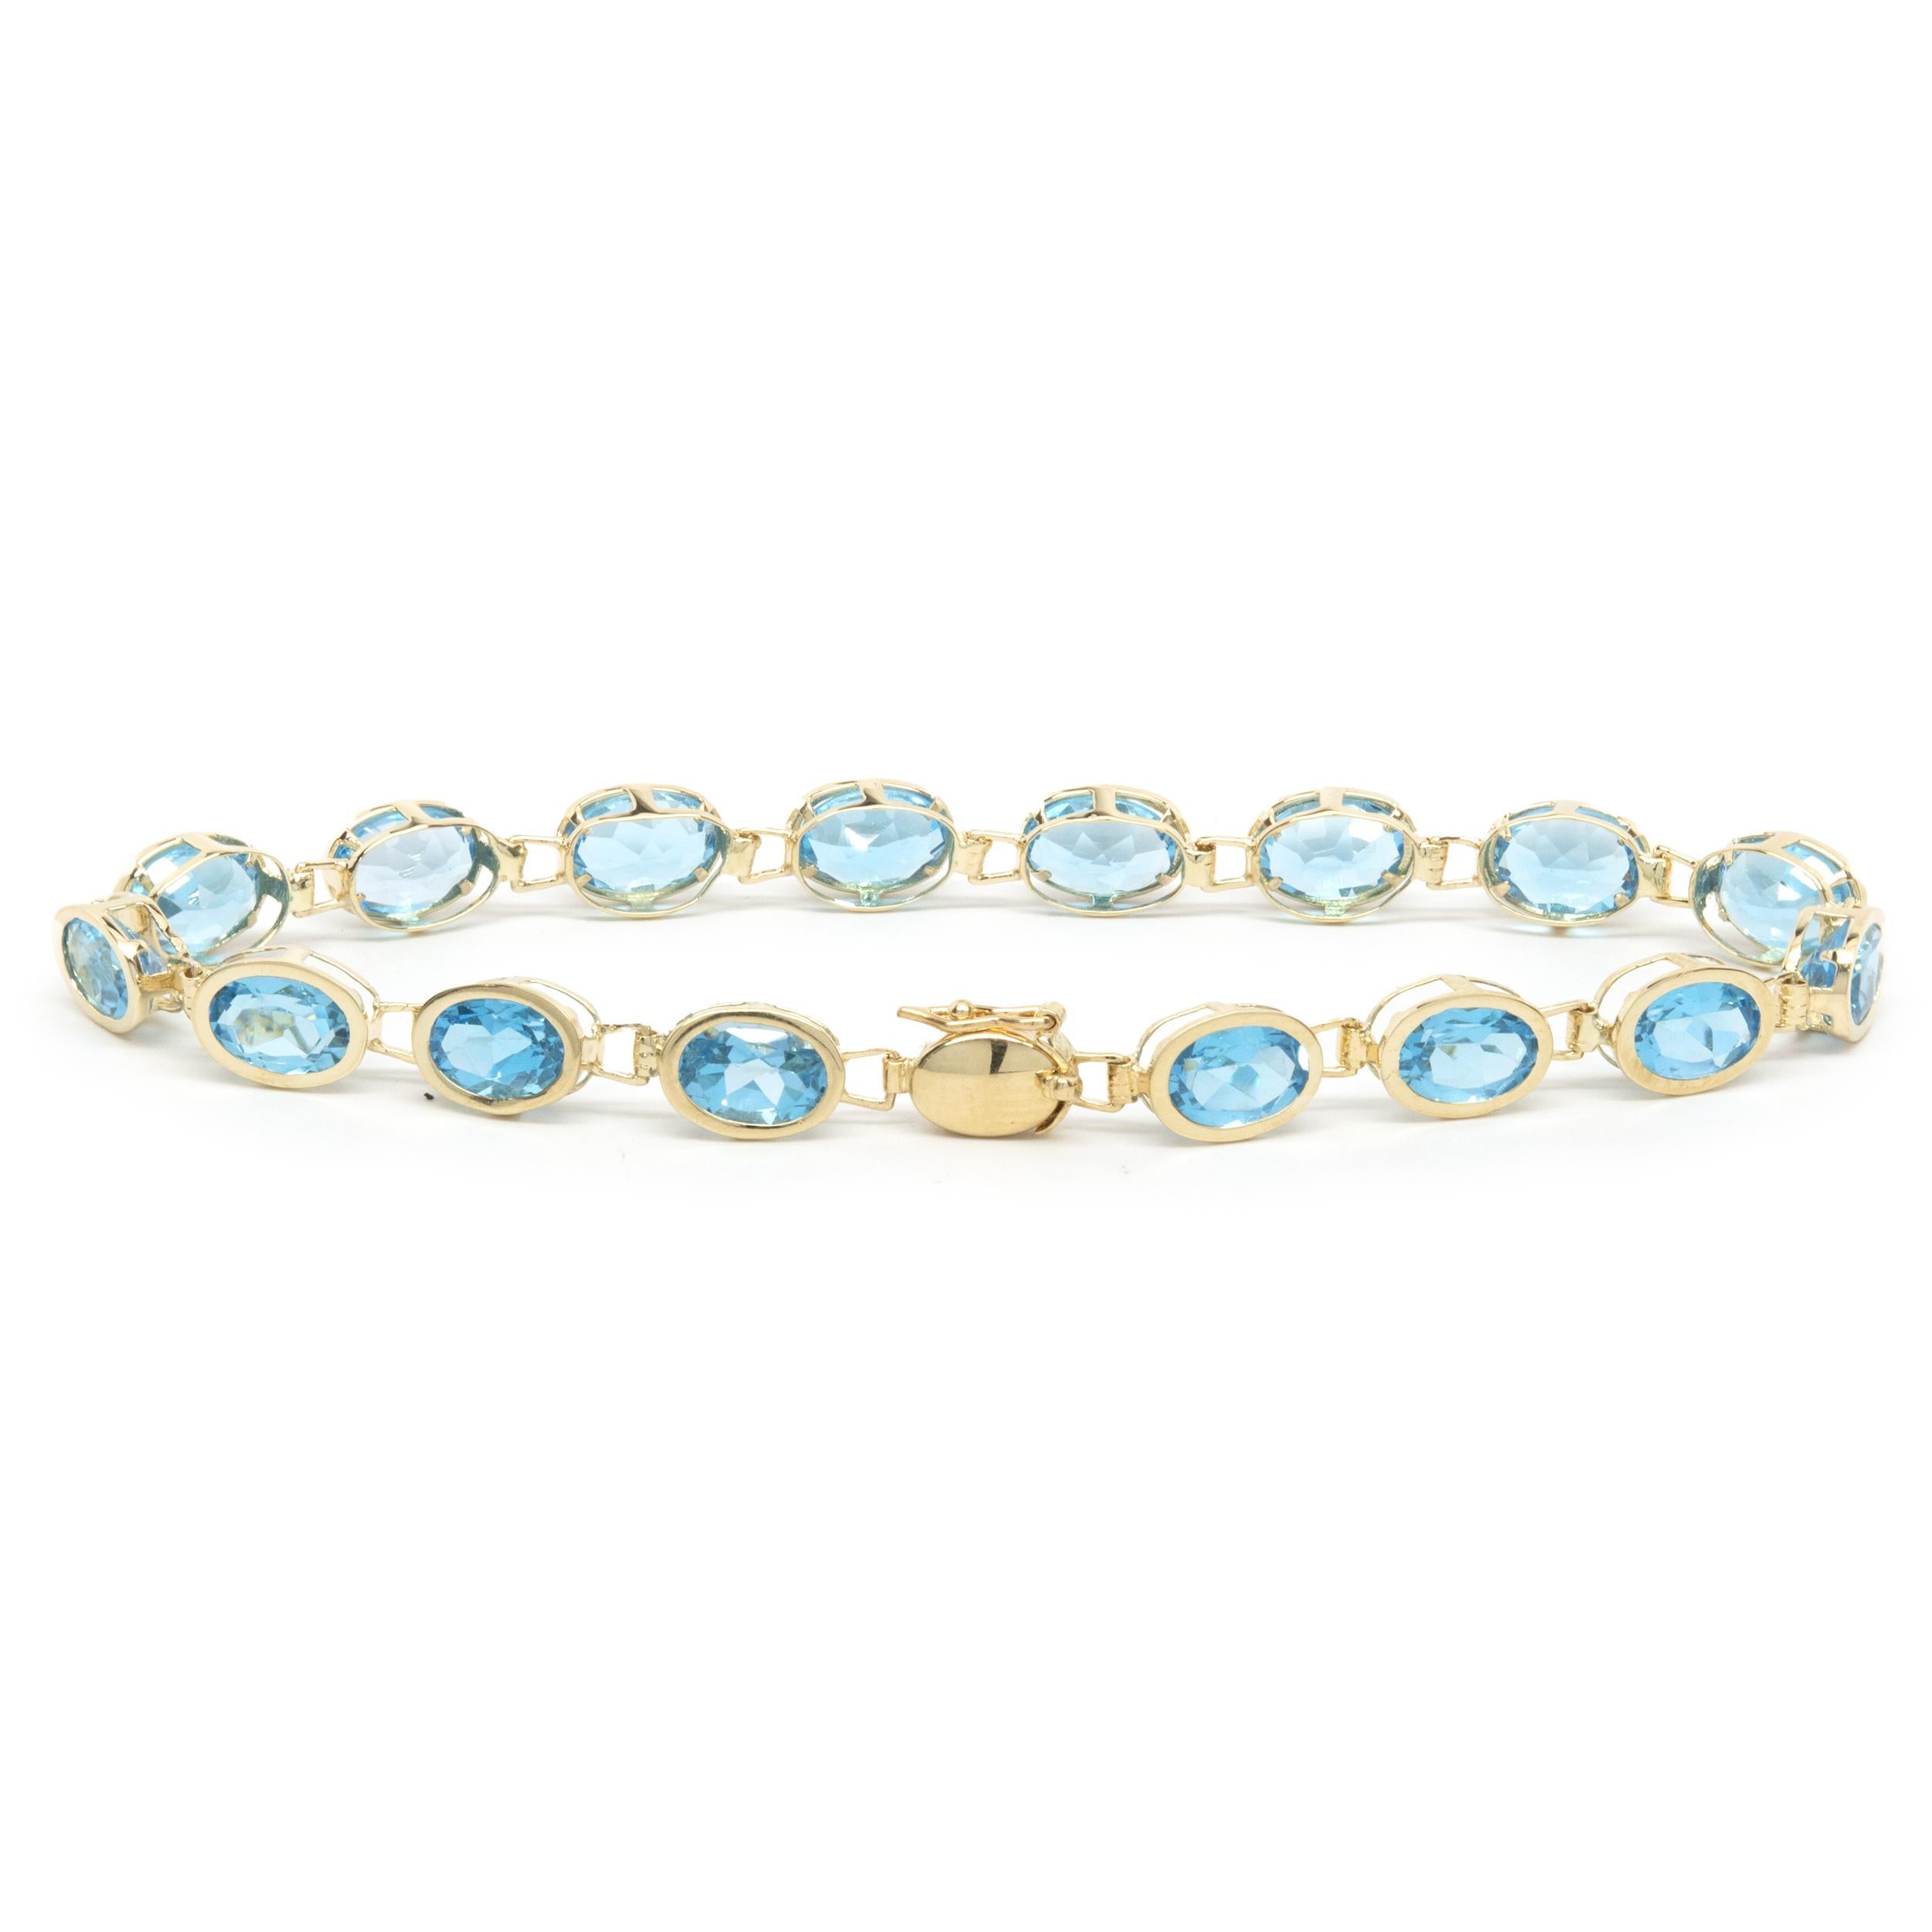 Designer: custom 
Material: 14K yellow gold
Blue Topaz: 16 oval cut = 13.00cttw
Color: Swiss Blue
Dimensions: bracelet will fit up to a 7-inch wrist
Weight: 6.90 grams
